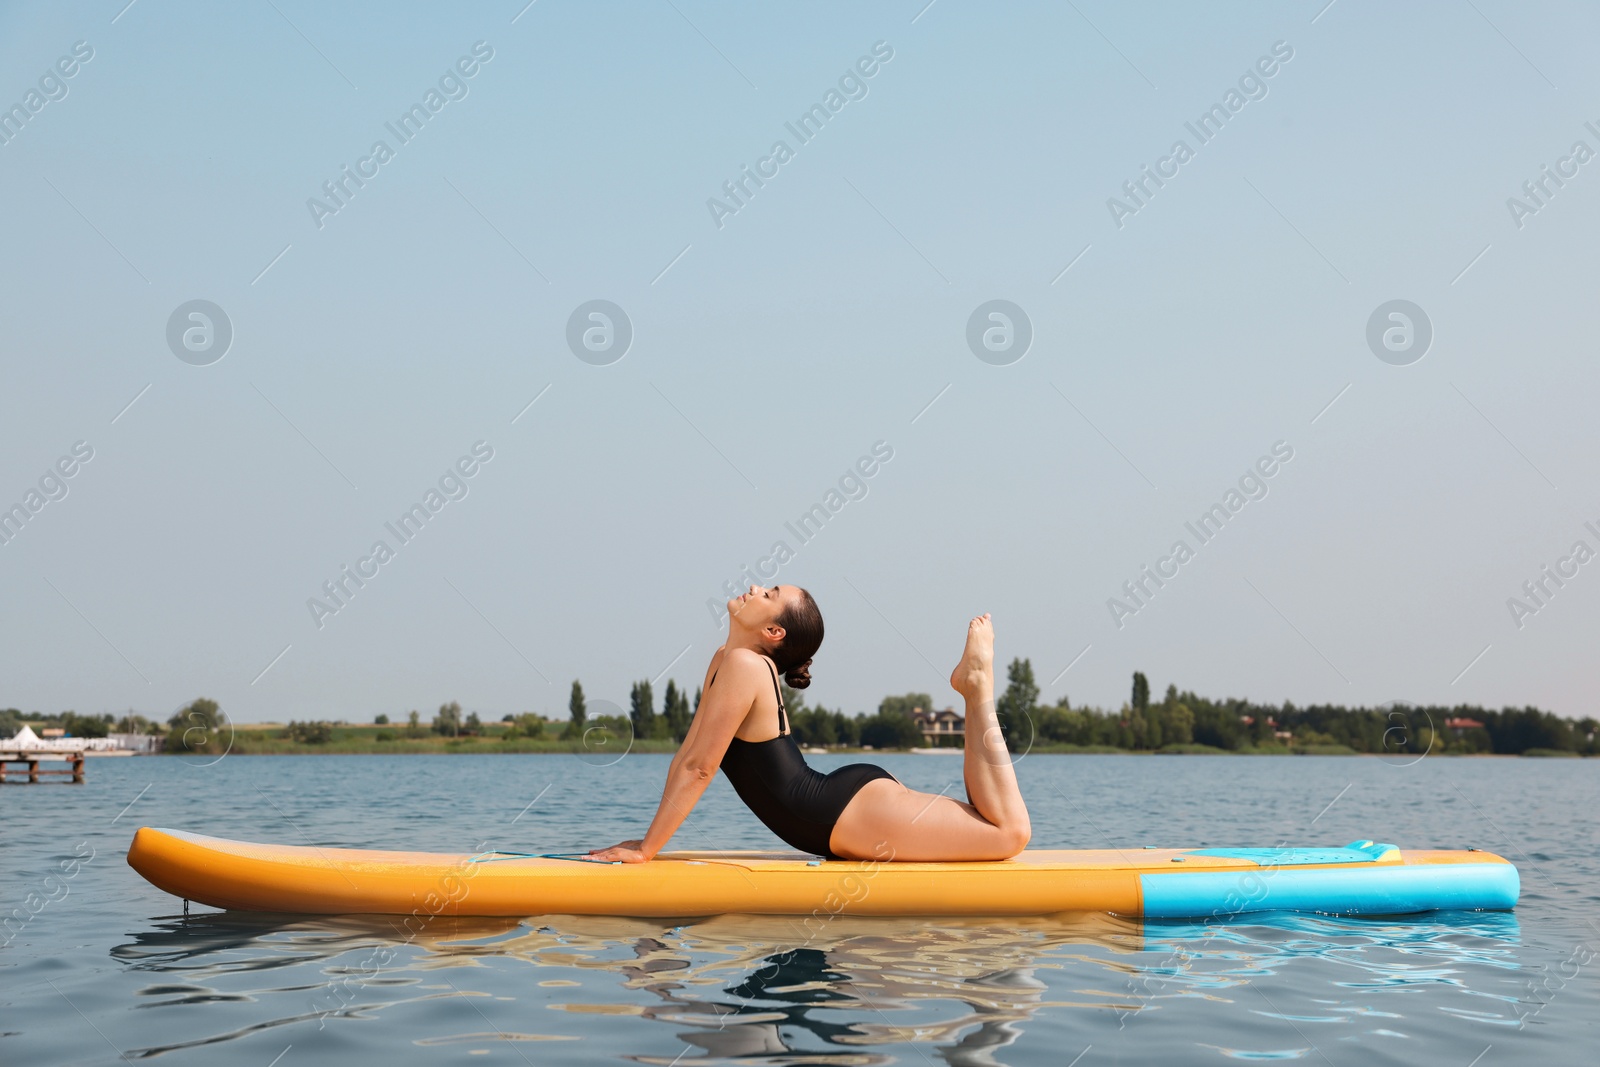 Photo of Woman practicing yoga on SUP board on river